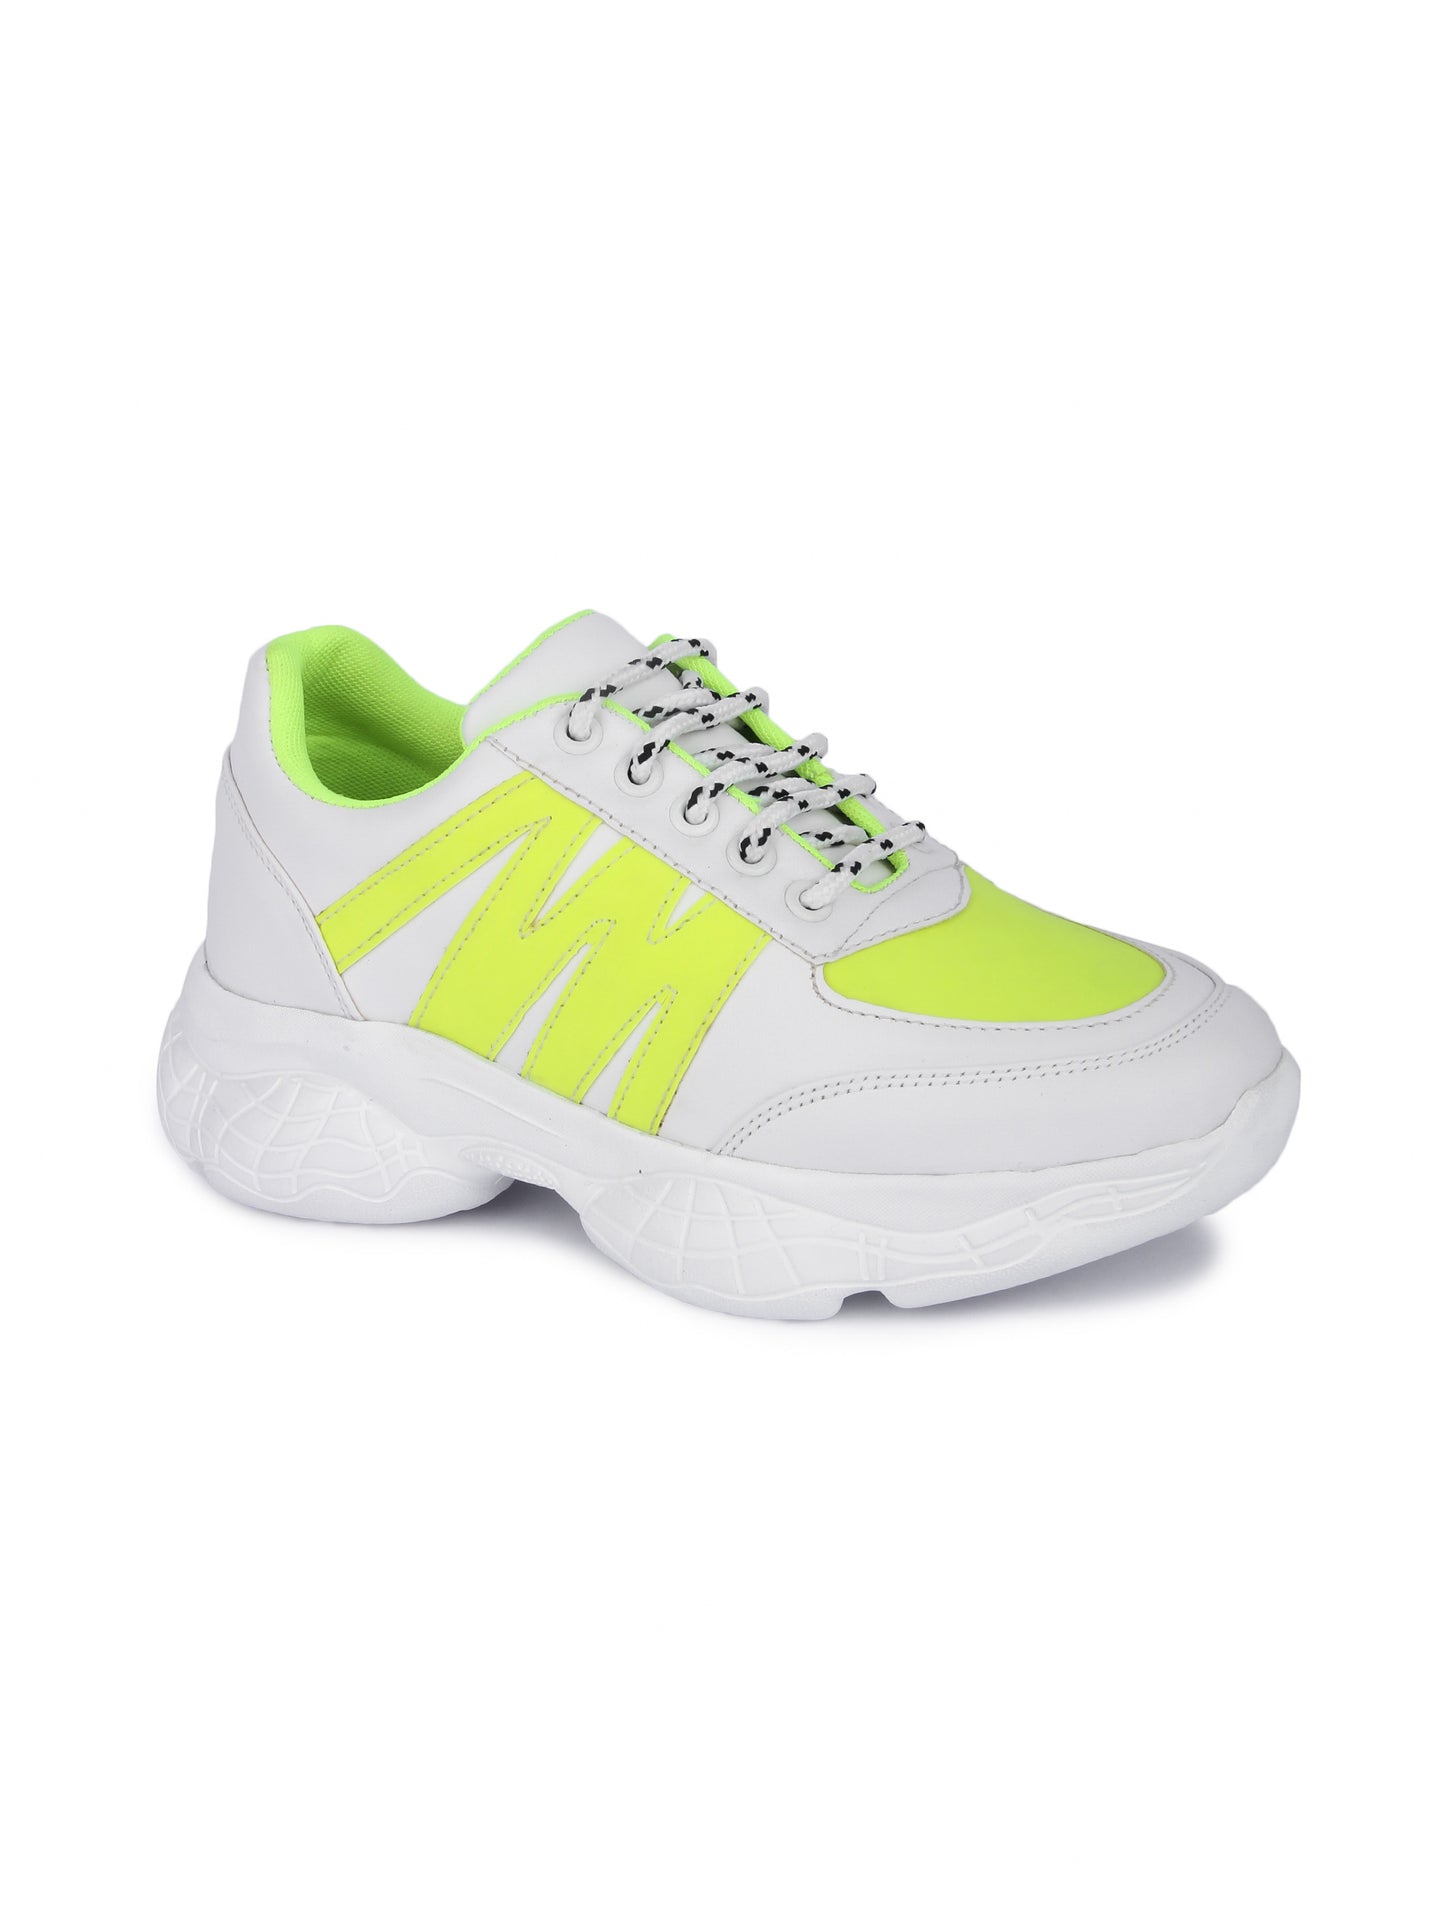 White and Neon Striped Casual Sneaker